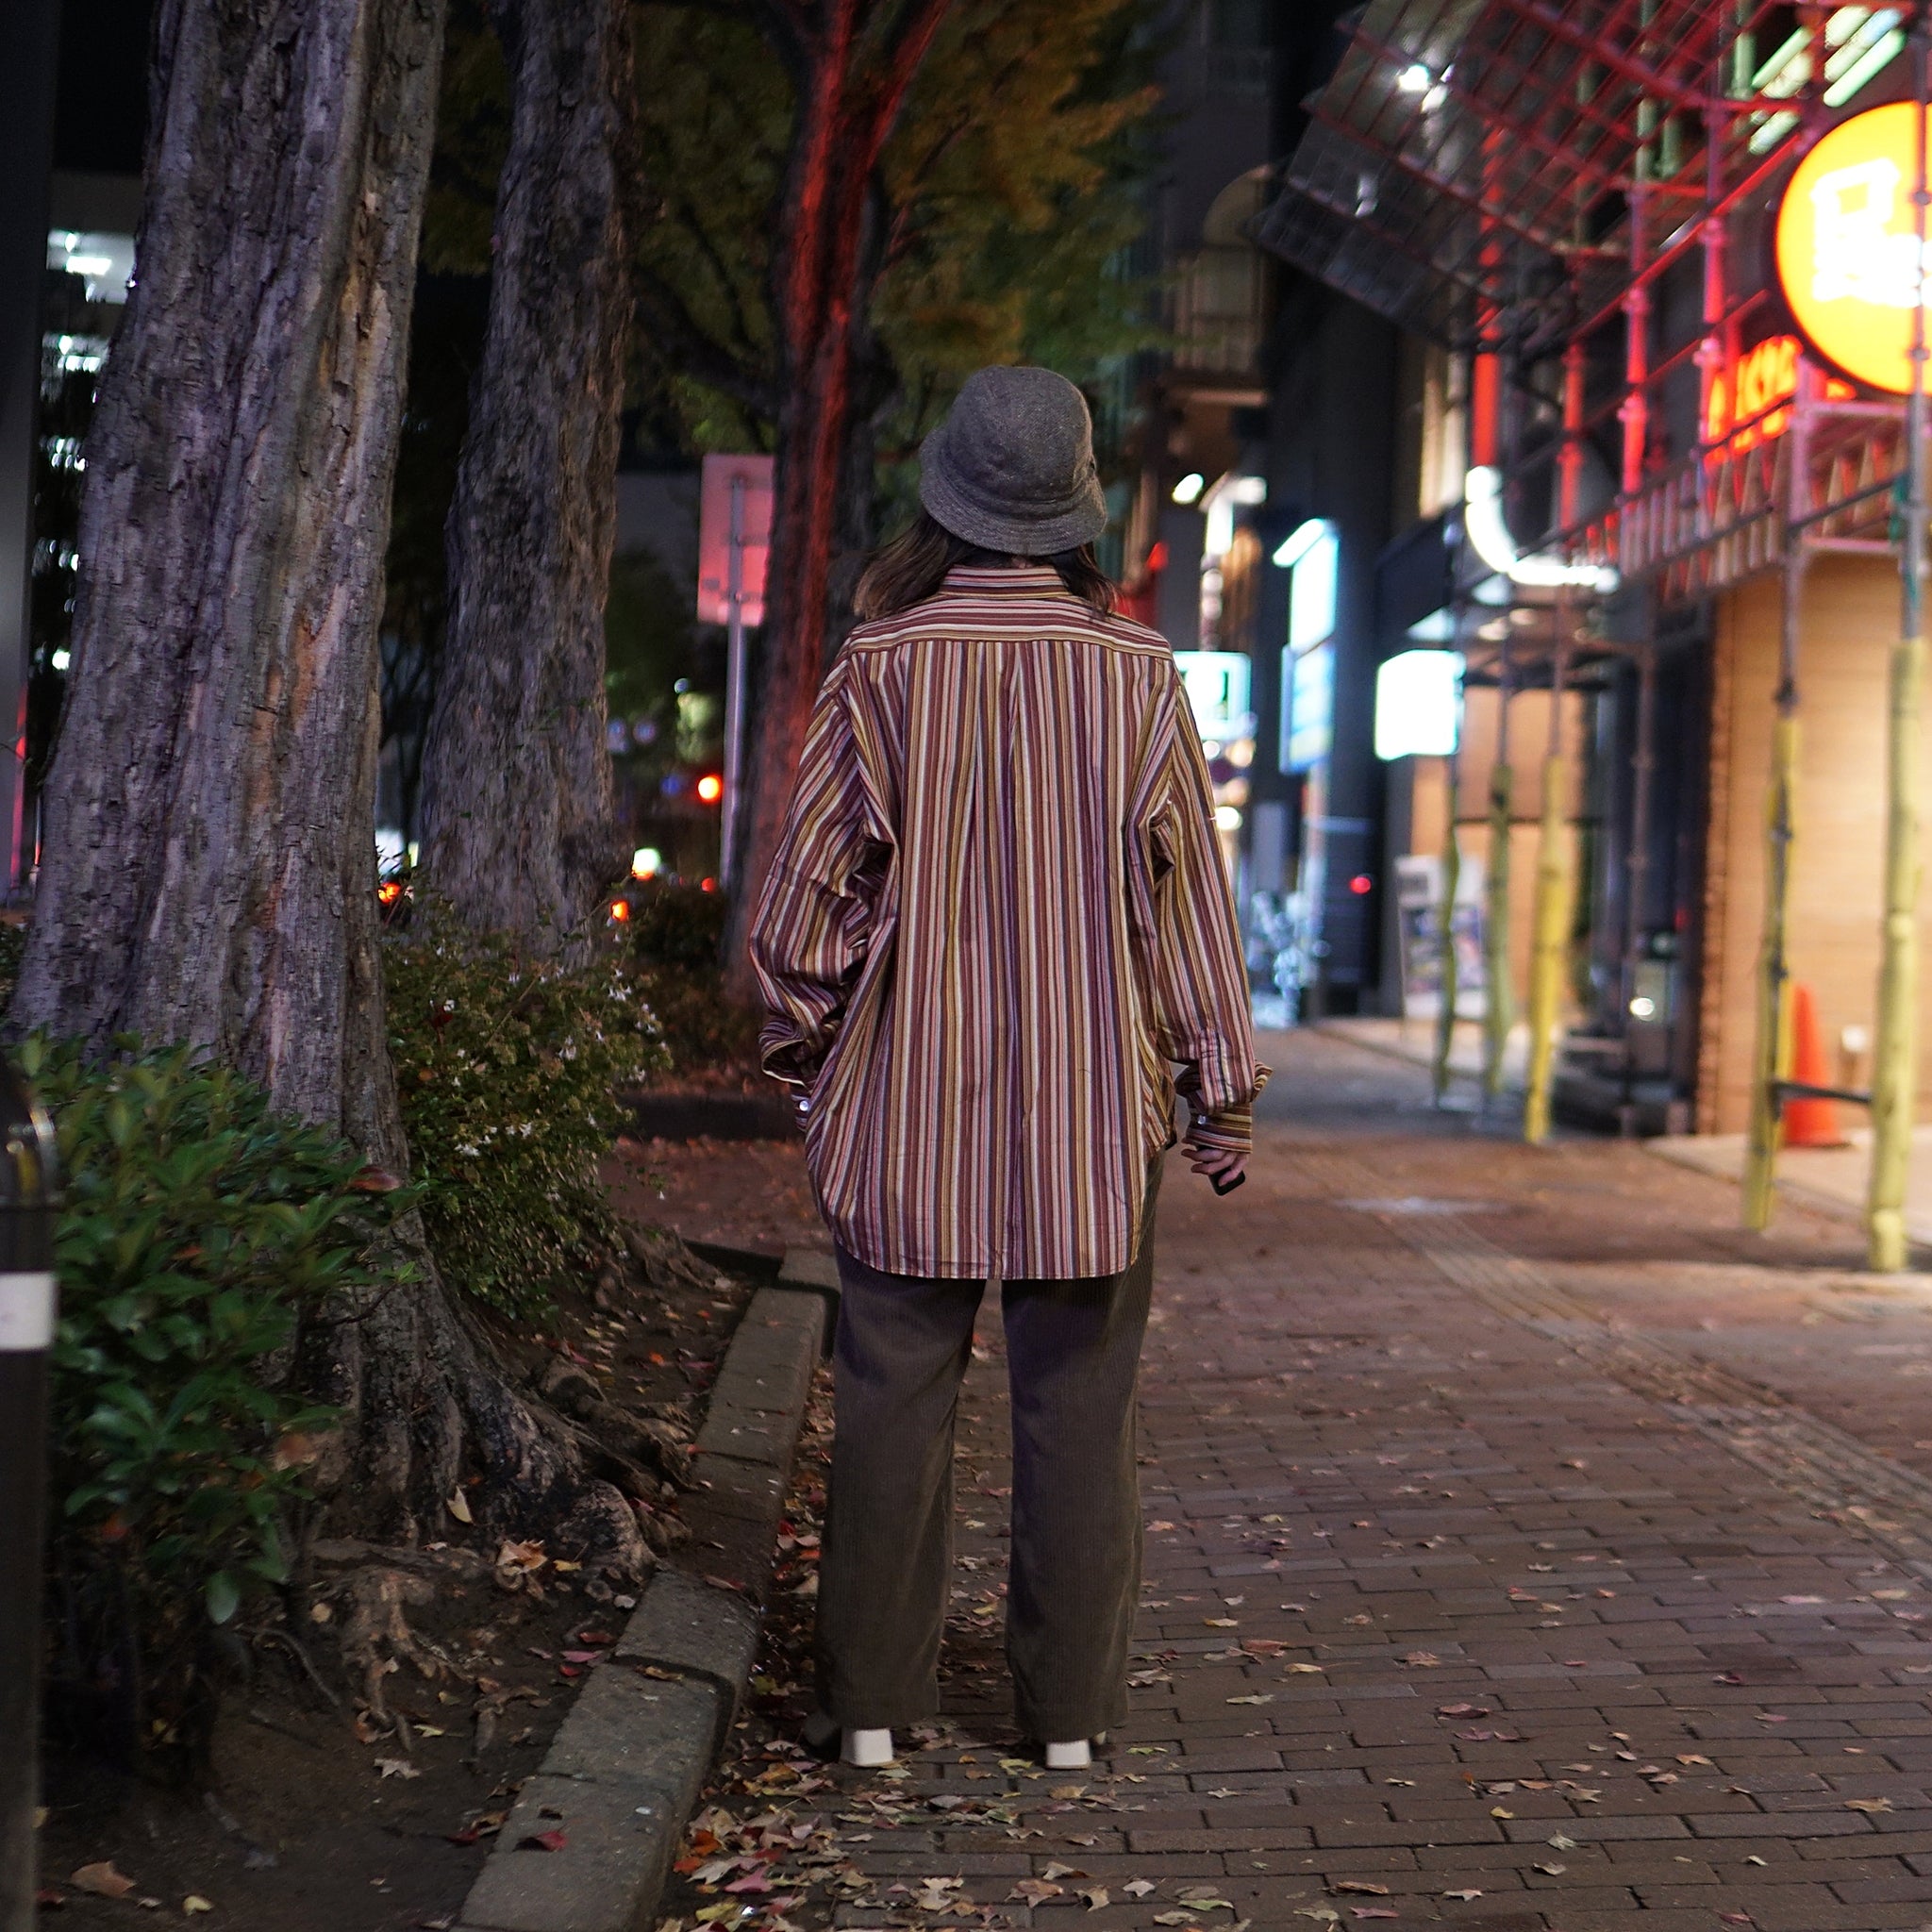 Name:OG REG SHIRTS | Color:MULTI STRIPE | Size:Regular/Tall 【CITYLIGHTS PRODUCTS_シティライツプロダクツ】